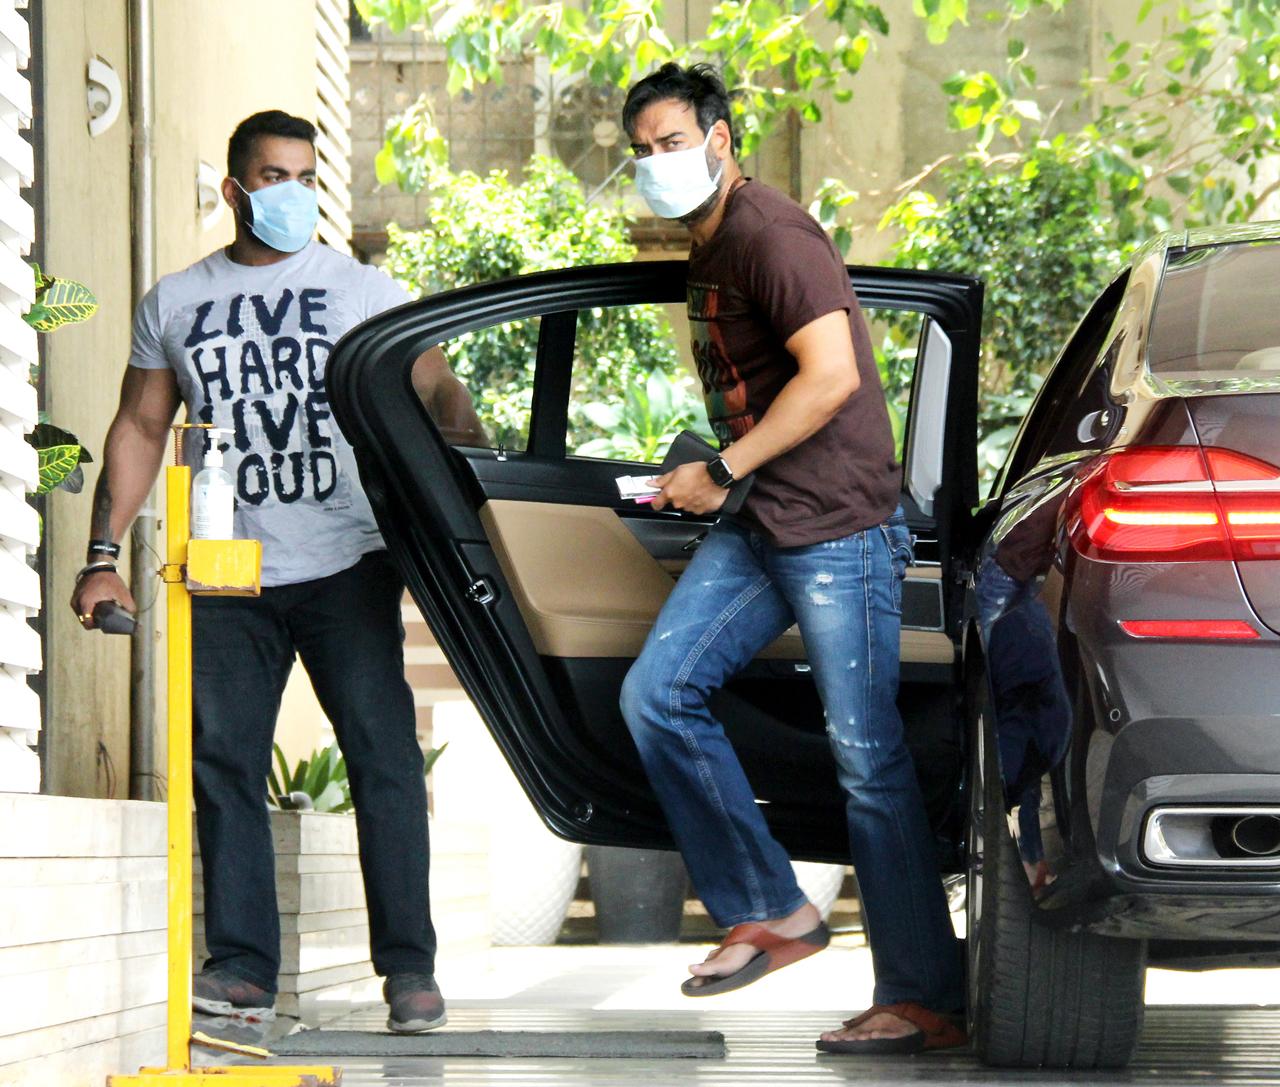 Ajay Devgn was snapped near his residence in Juhu, Mumbai. The actor was casually dressed, brown t-shirt, blue jeans and all masked up! On the work front, the actor will be seen in 'RRR', followed by 'Maidaan' and his web debut 'Rudra: The Edge of Darkness'.